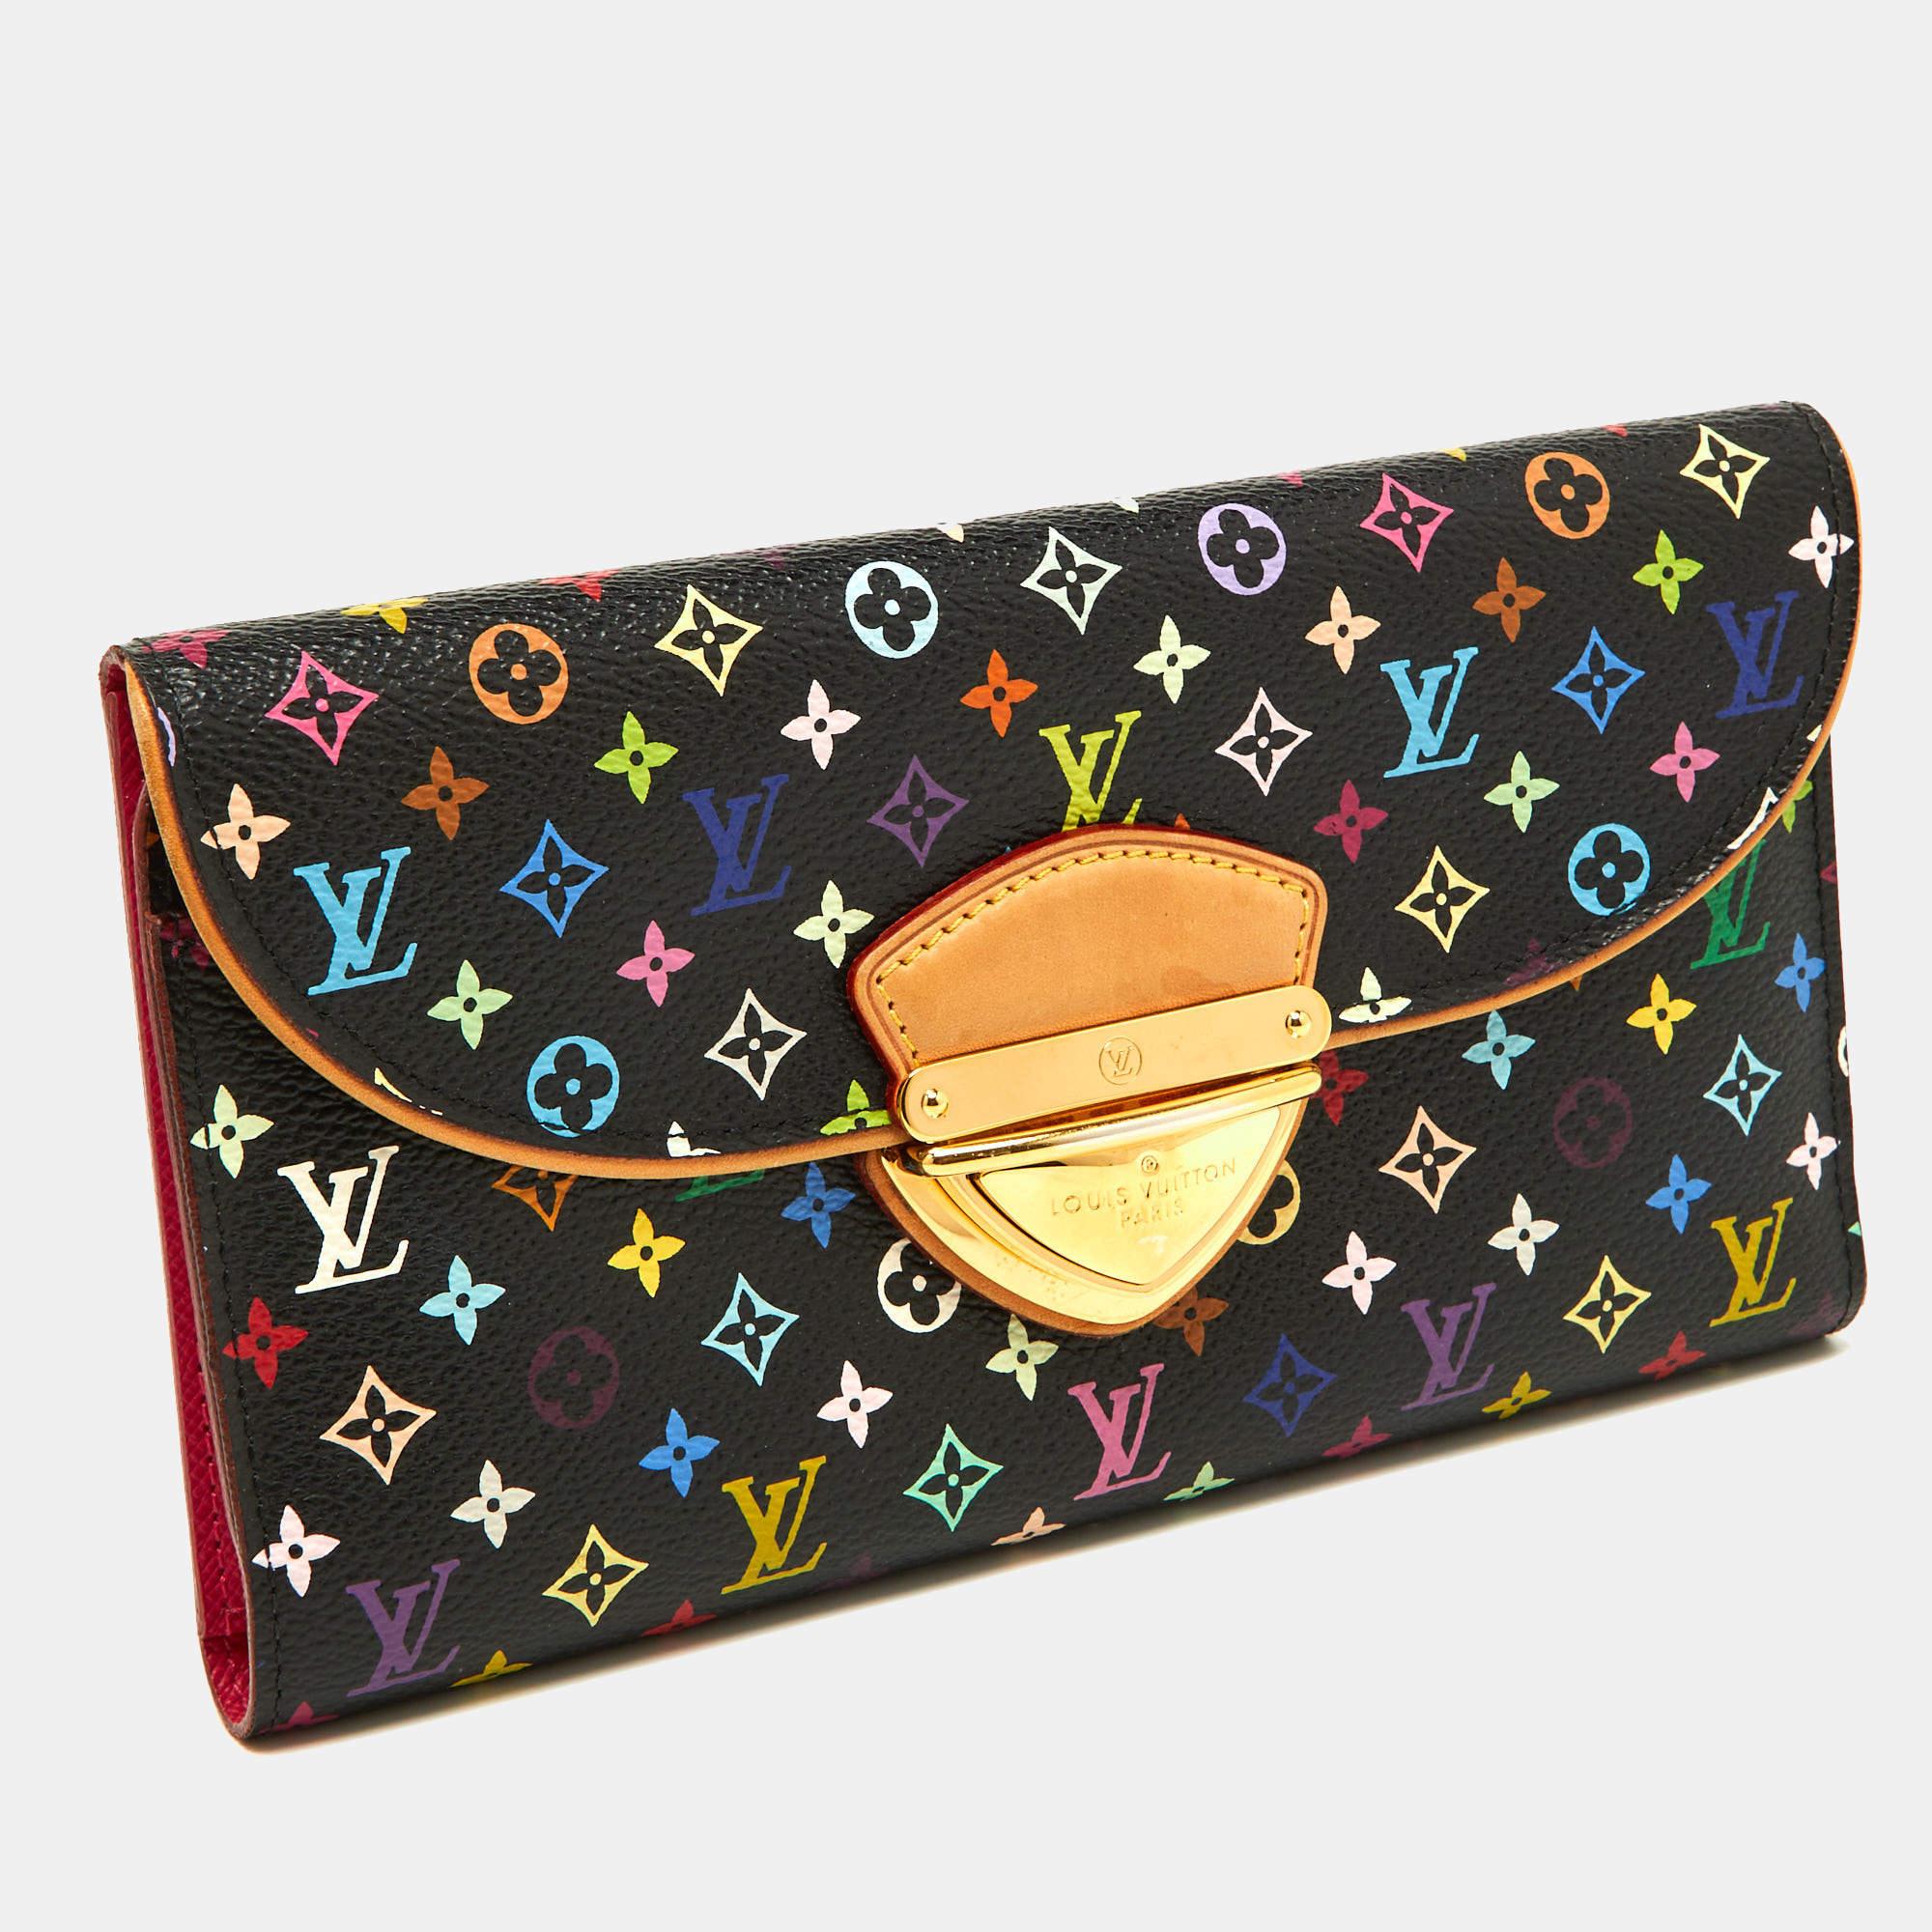 Stylish wallets are a closet must-have! This Eugenie wallet from the house of Louis Vuitton has been crafted from Multicolore Monogram canvas in France. It has been styled as a trifold with a push-lock flap that opens up to a leather interior